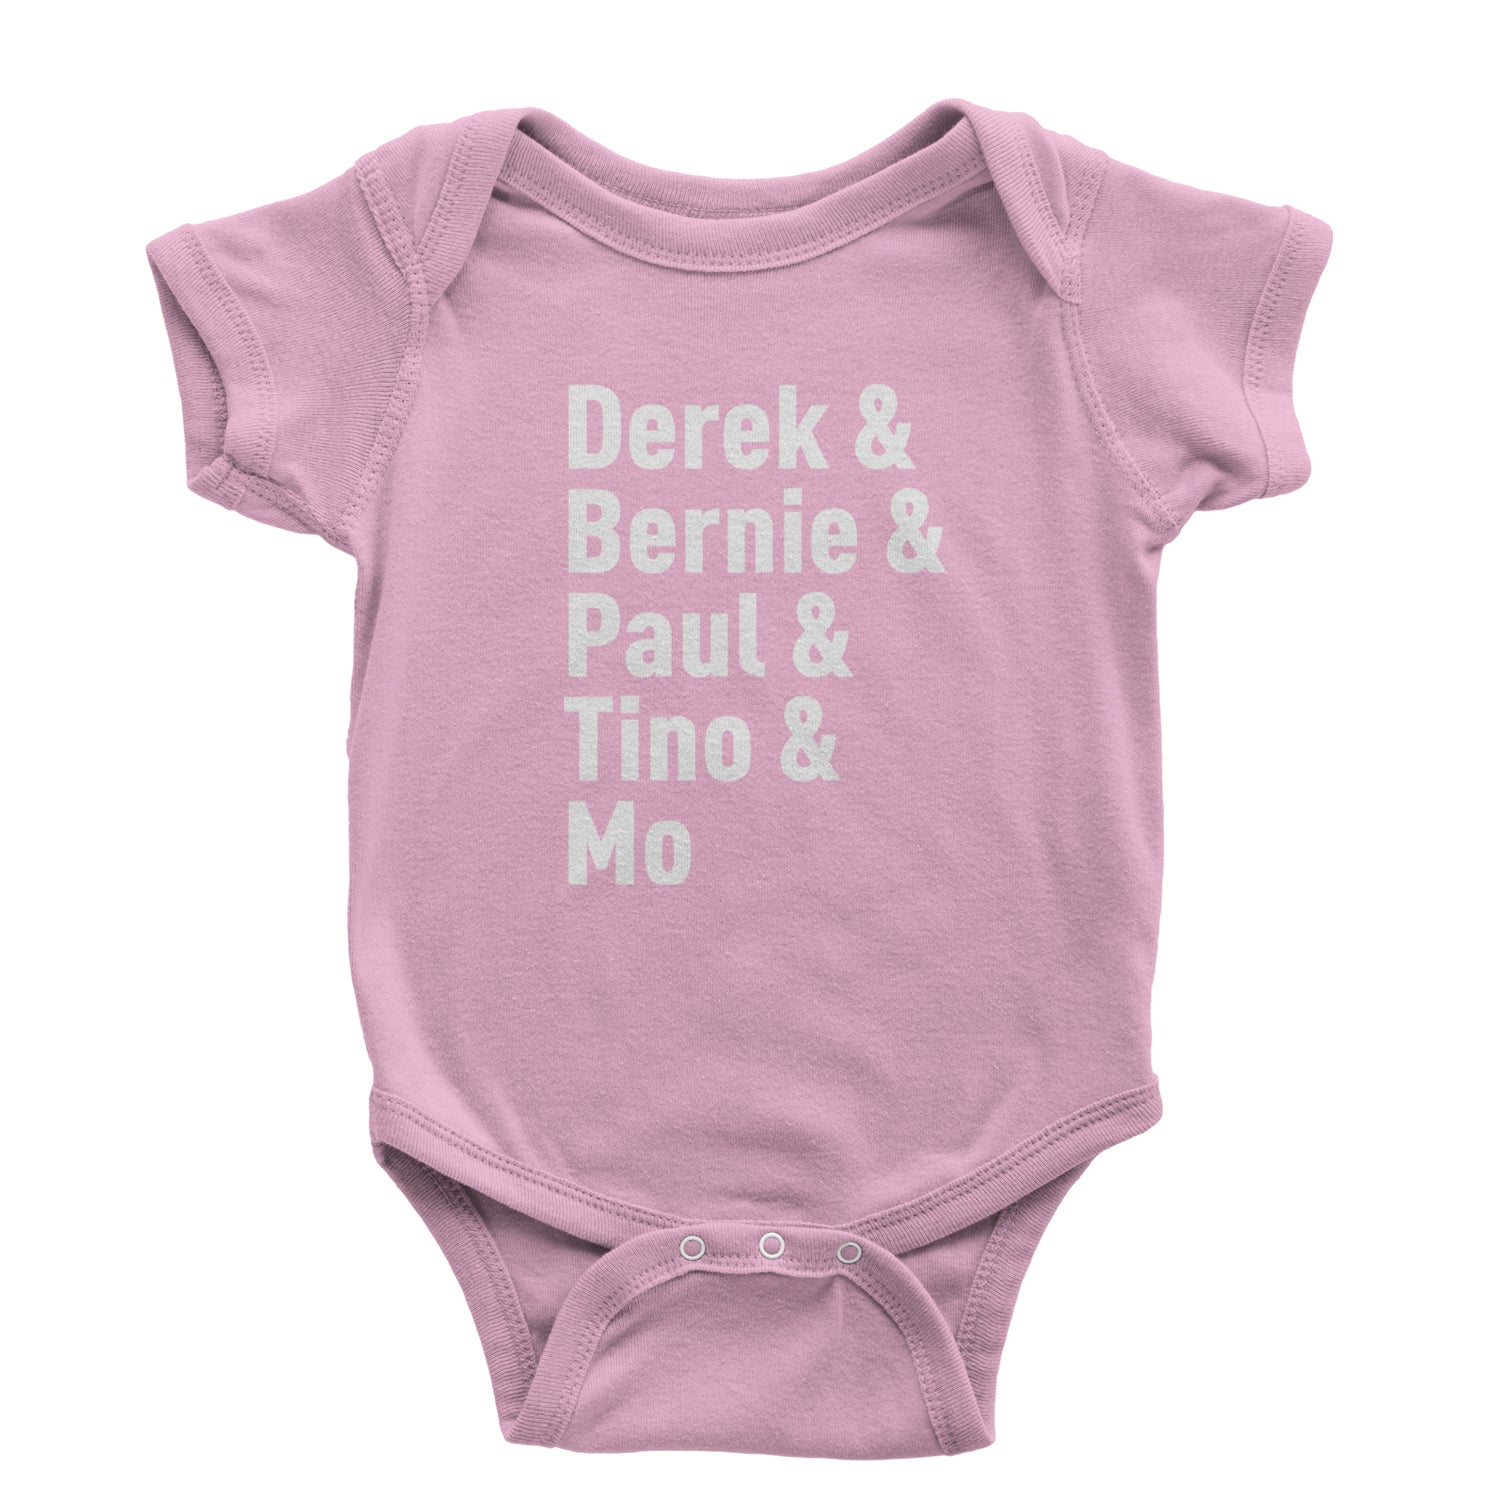 Derek and Bernie and Paul and Tino and Mo Infant One-Piece Romper Bodysuit and Toddler T-shirt baseball, comes, here, judge, the by Expression Tees